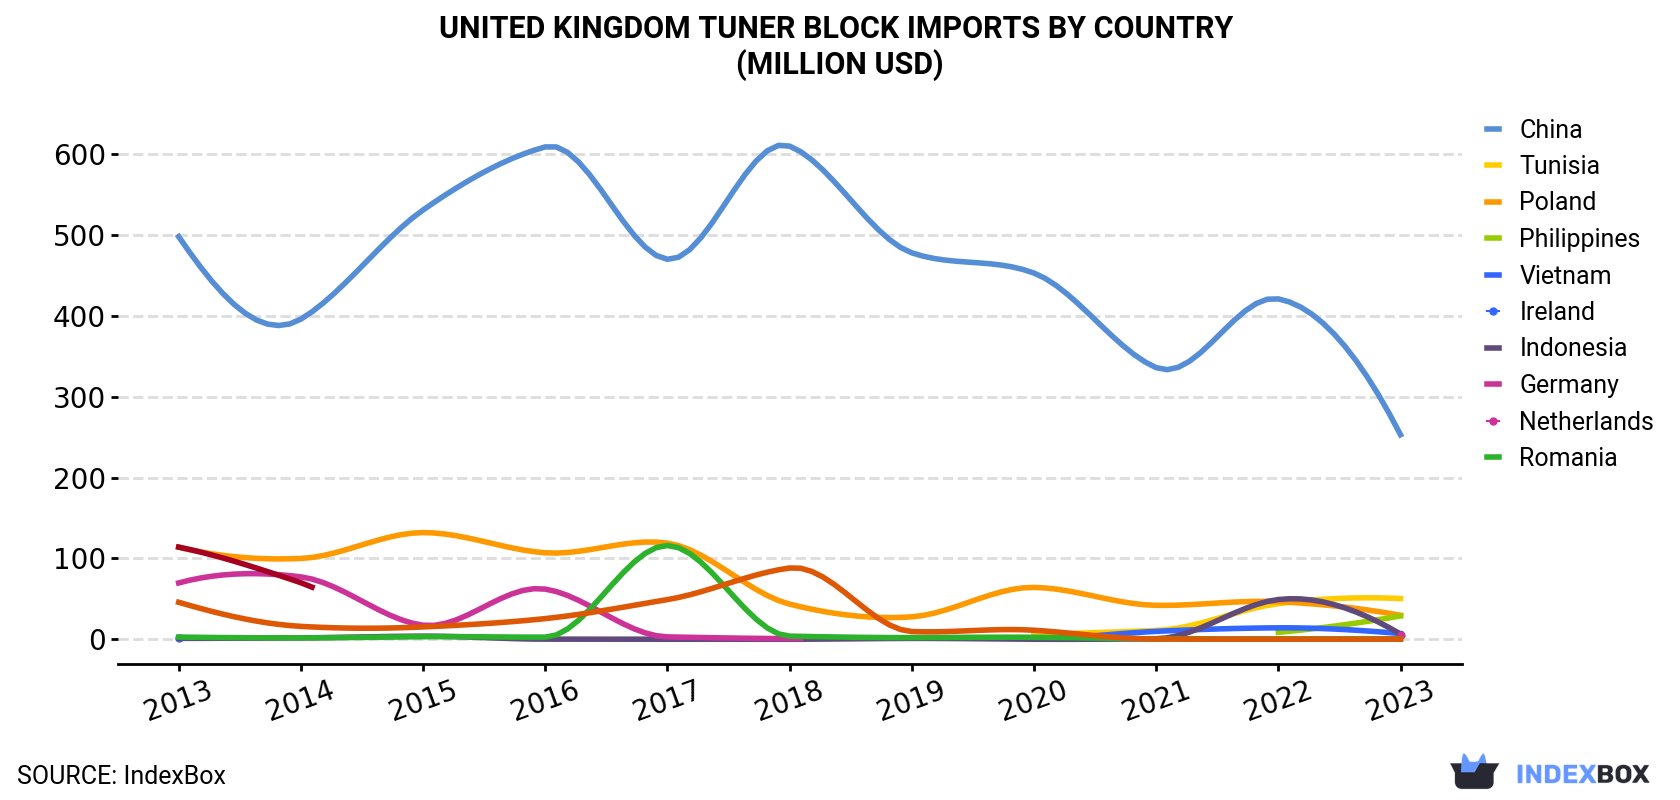 United Kingdom Tuner Block Imports By Country (Million USD)